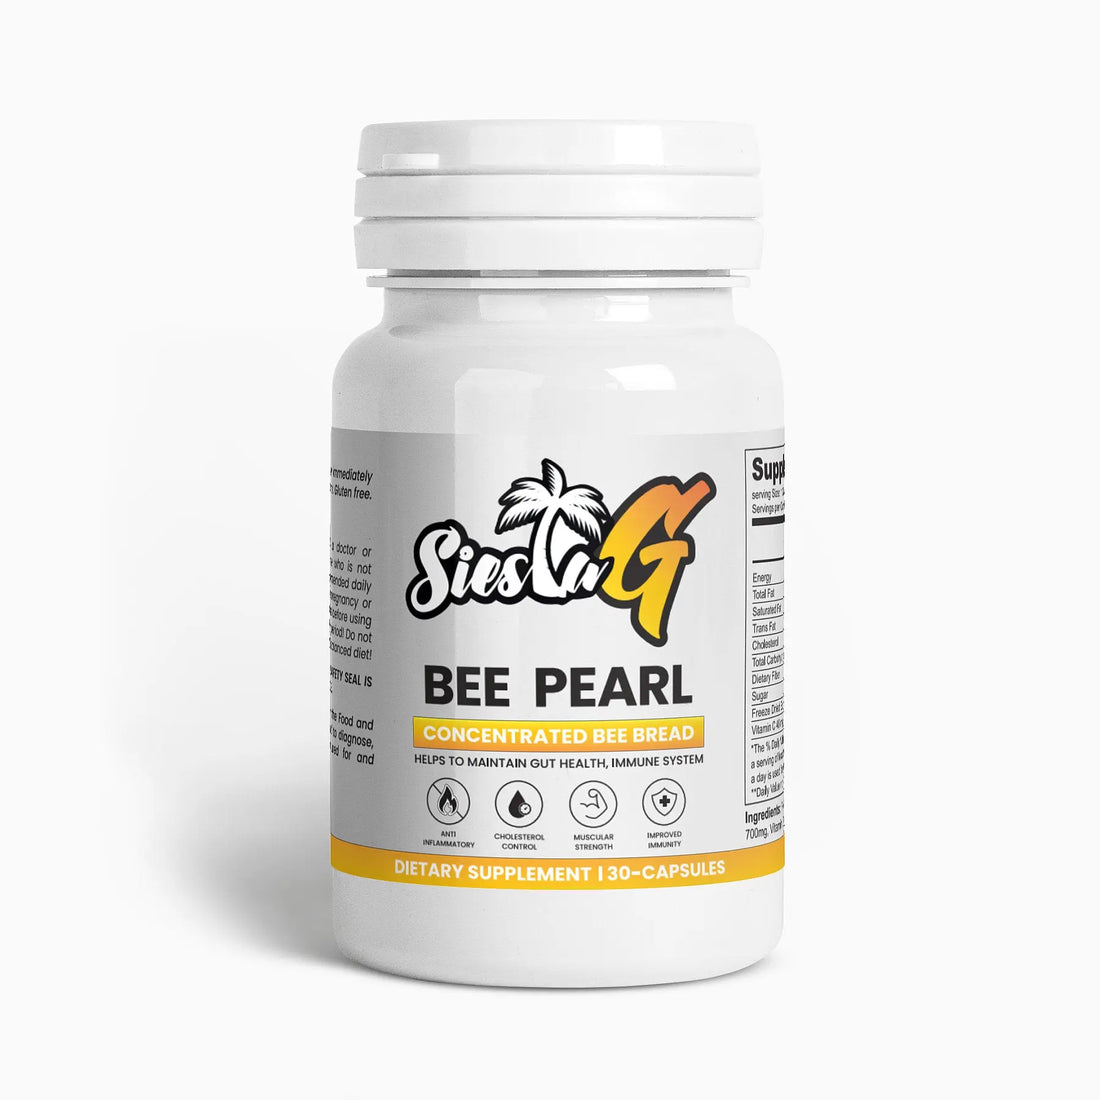 Natural Extracts Bee Pearl Siesta G Siesta G Dispensary